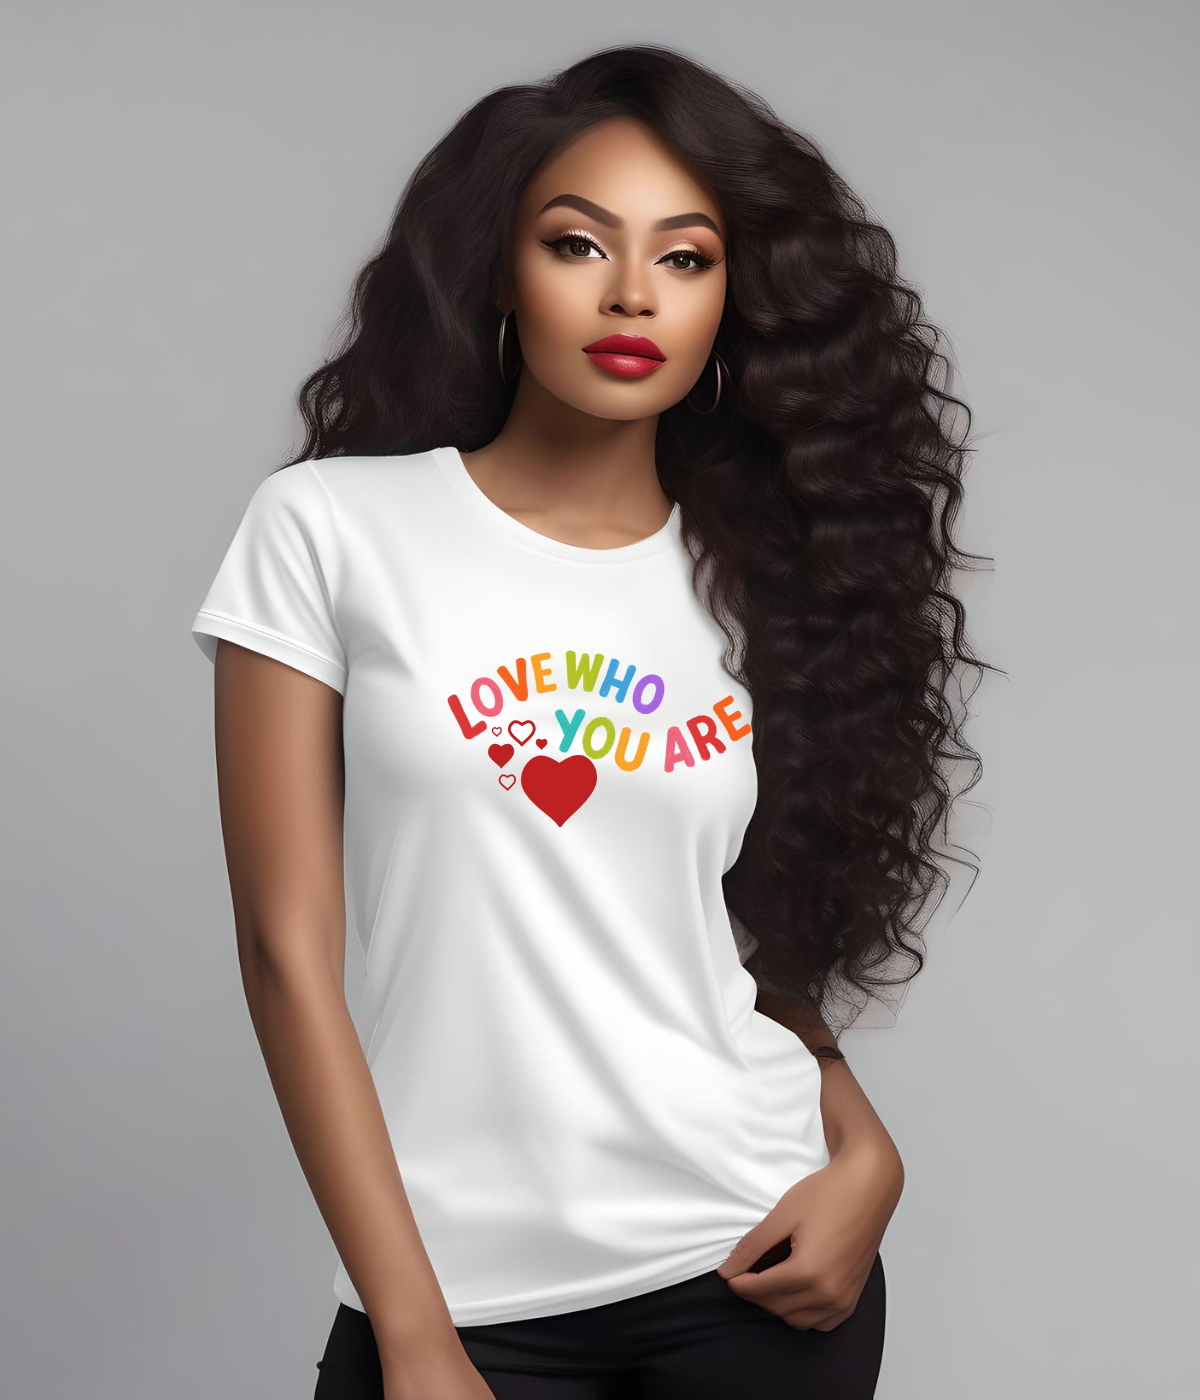 Women's Love Who You Are T-Shirt